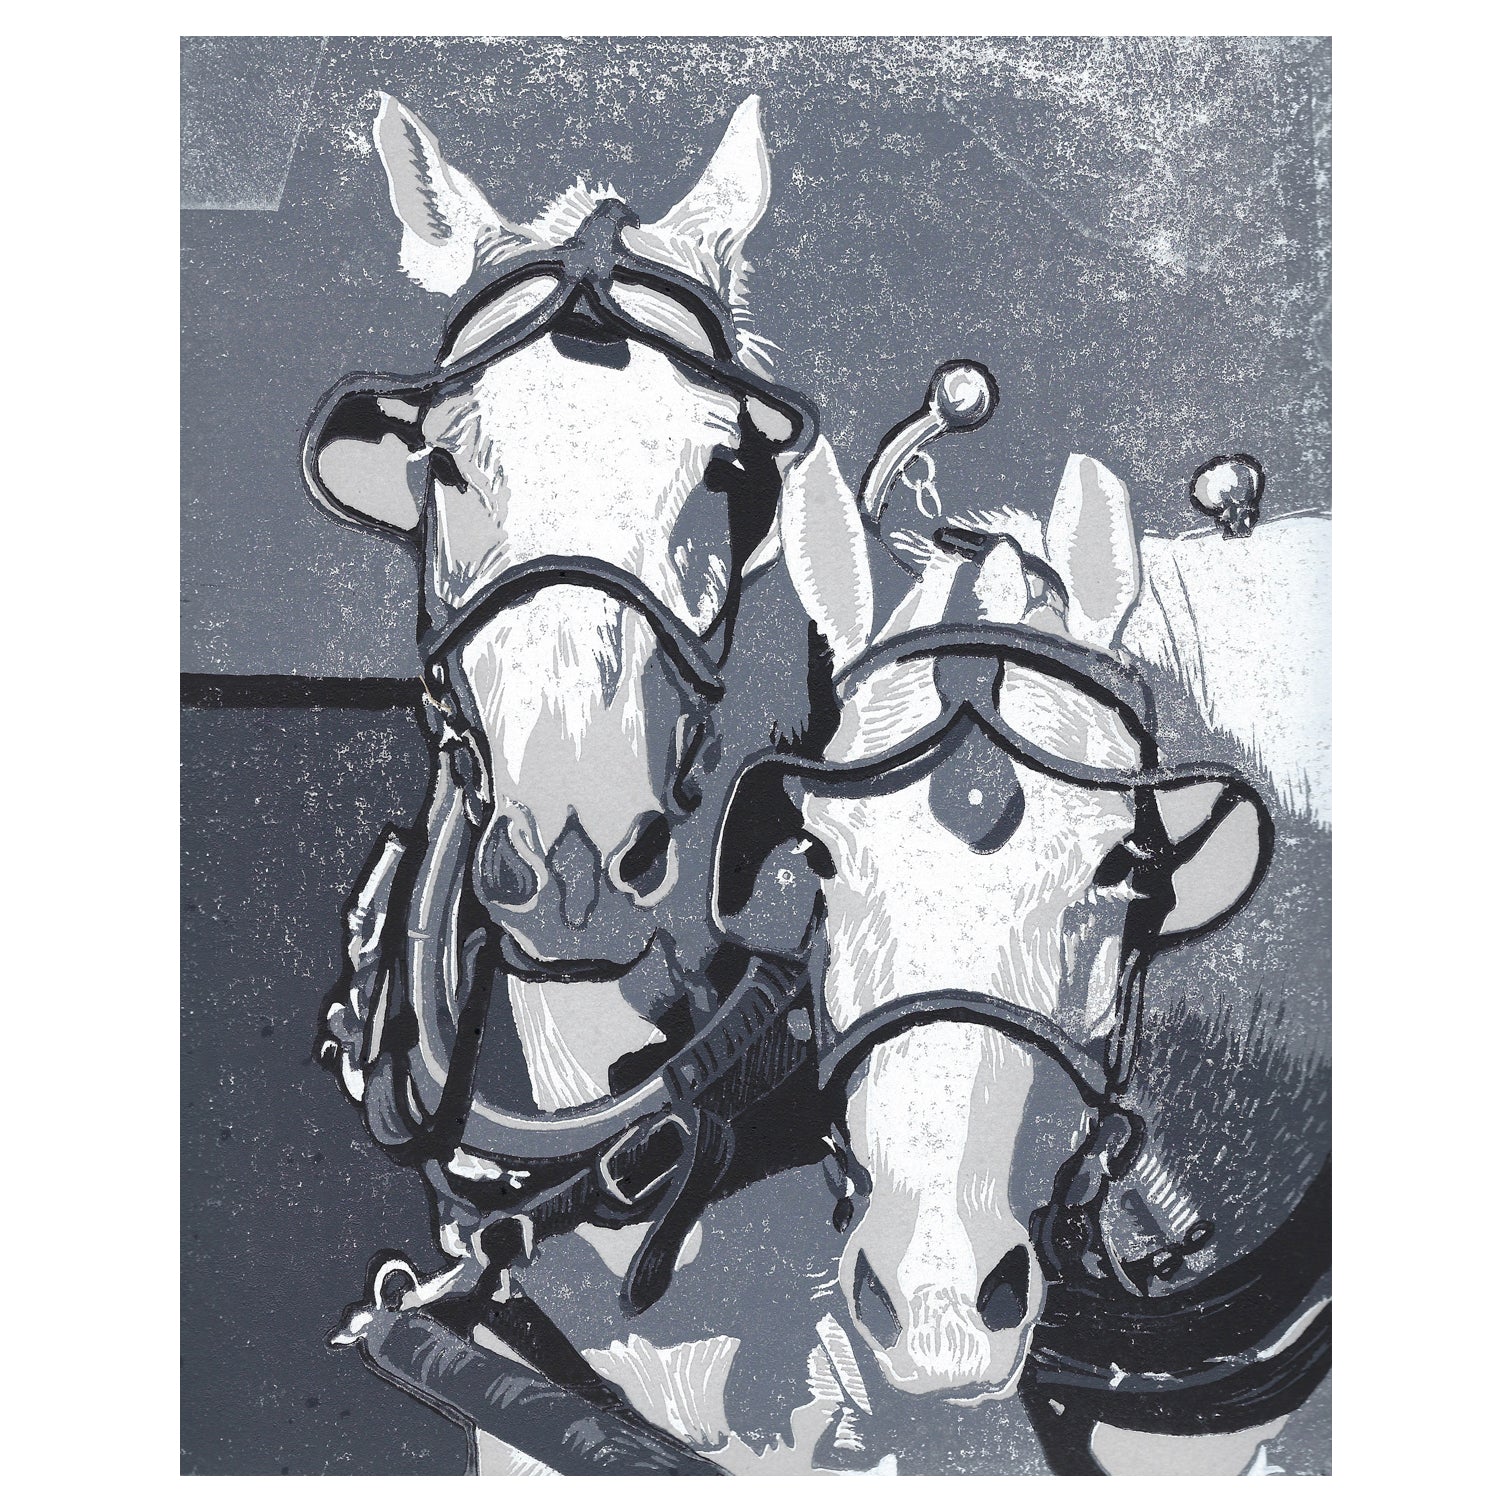 Horse art created by Natalia Wohletz of Peninsula Prints.  Based upon the Percherons of Mackinac Island, this original block print titled Two Horse Team speaks to the strength and beauty of horses. 